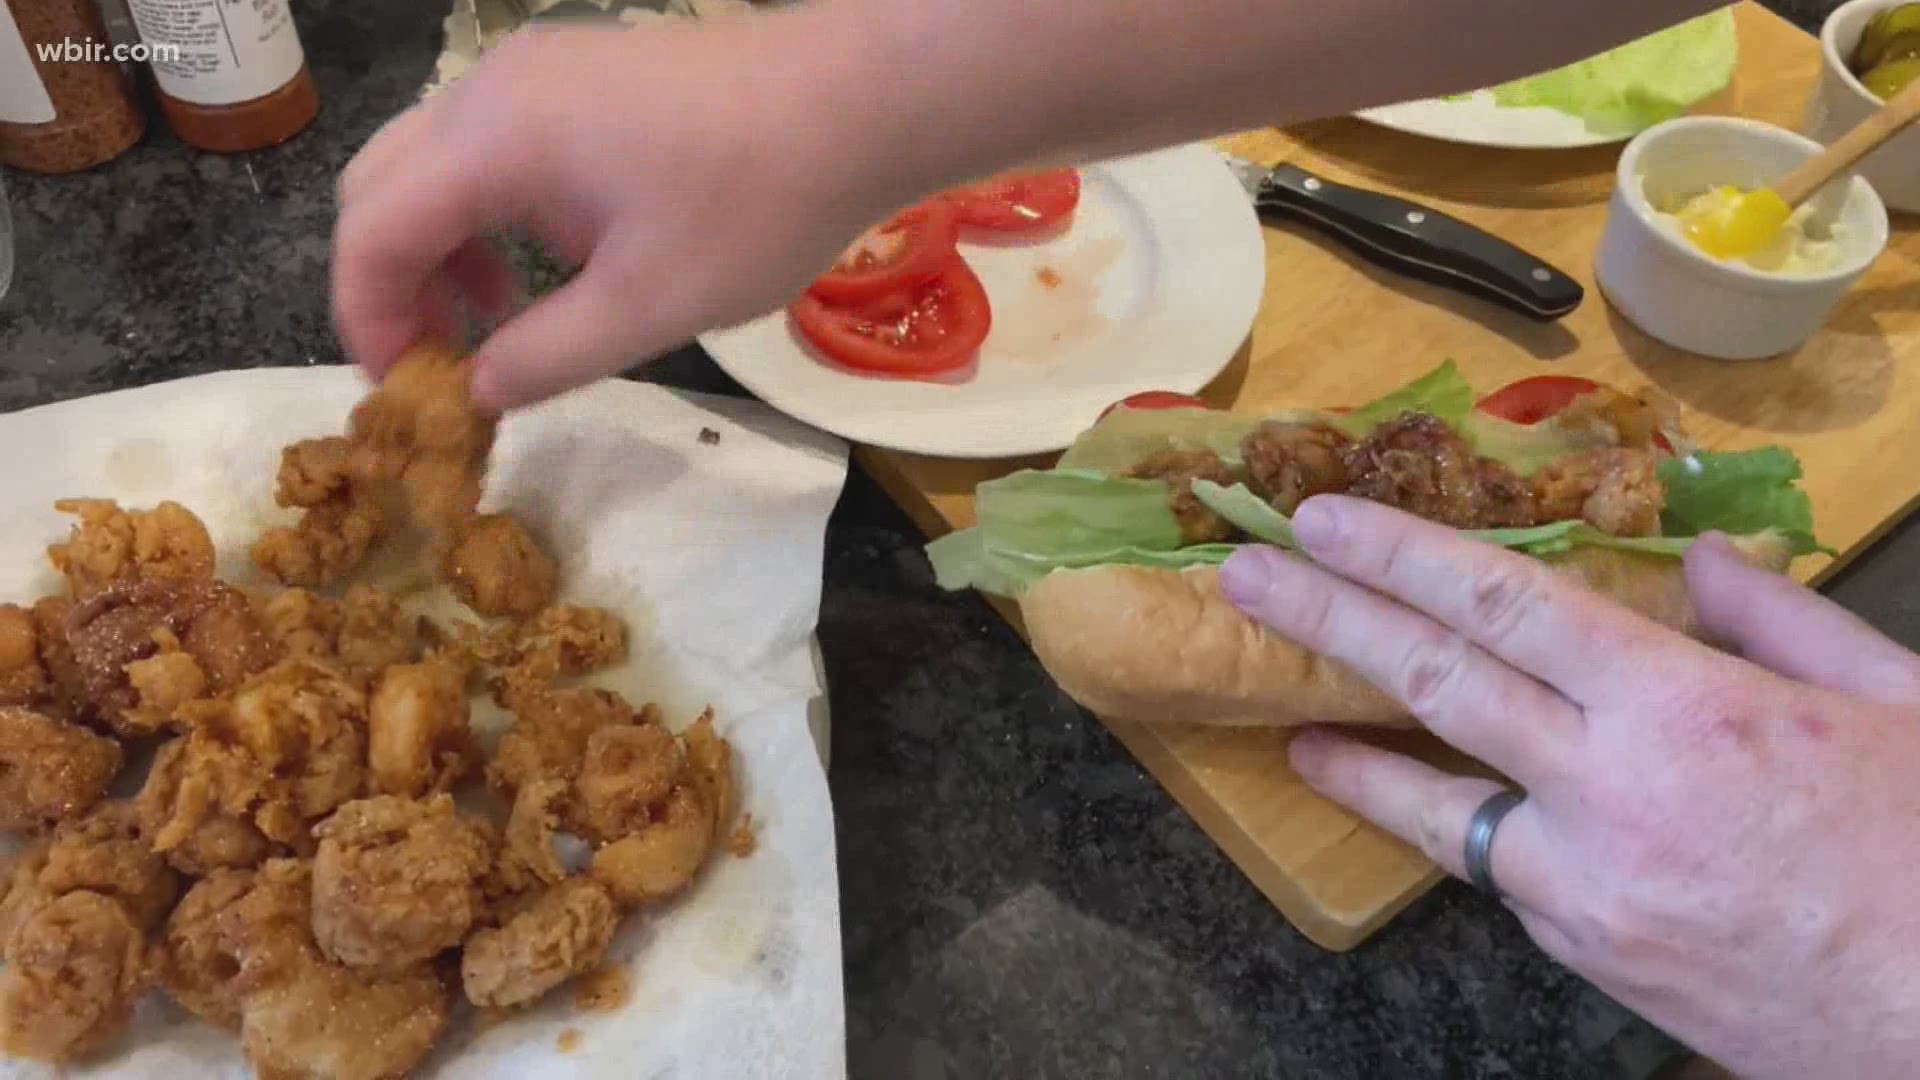 Jimmy with The Old Mill in Pigeon Forge shares a recipe for Shrimp Po' Boy, visit old-mill.com to learn more. May 29, 2020-4pm.